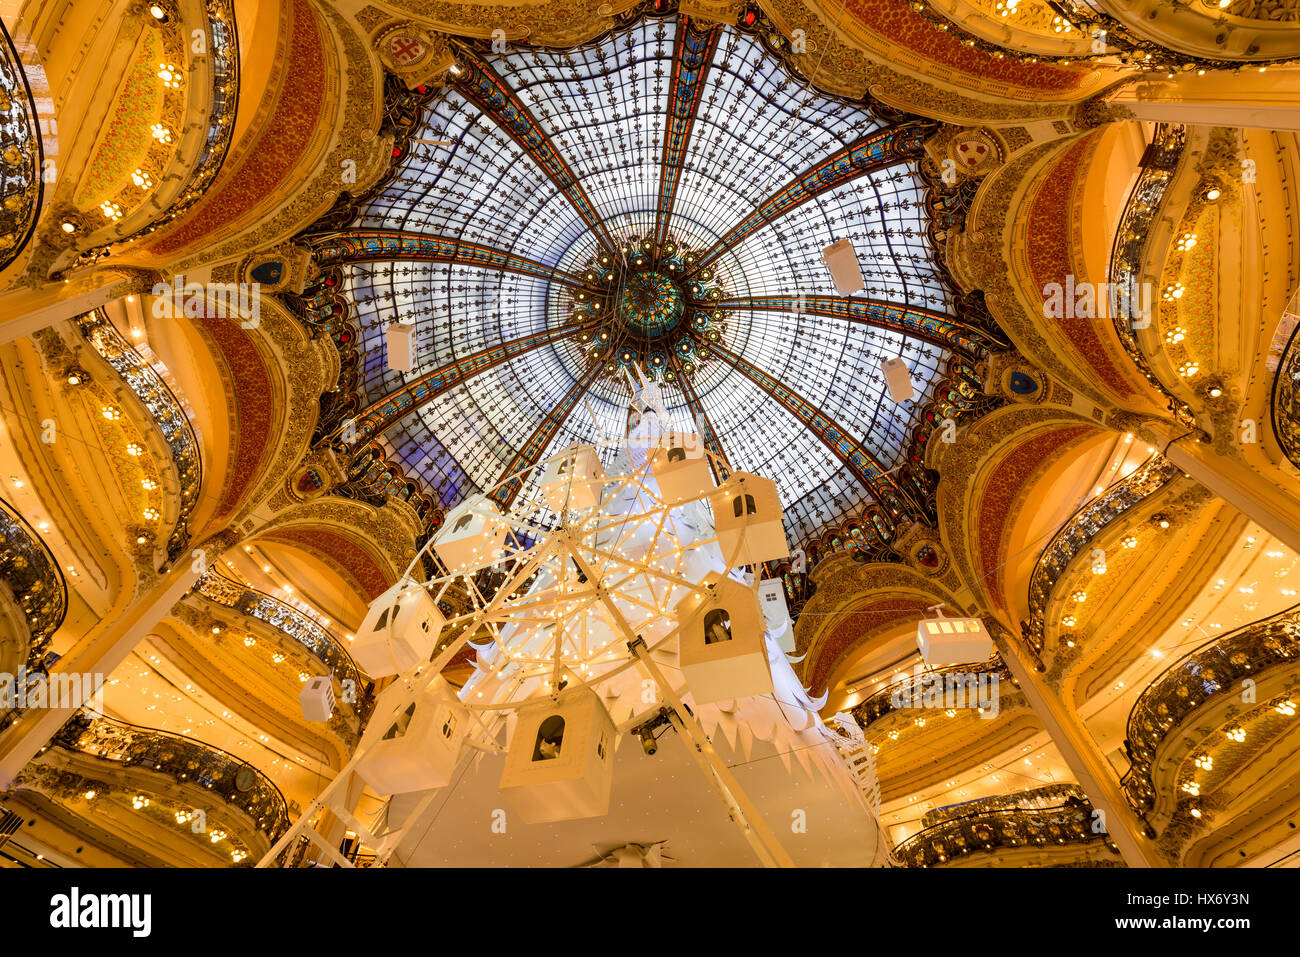 Galleries Lafayette Haussman interior with glass cupola at Christmas. Paris, France Stock Photo